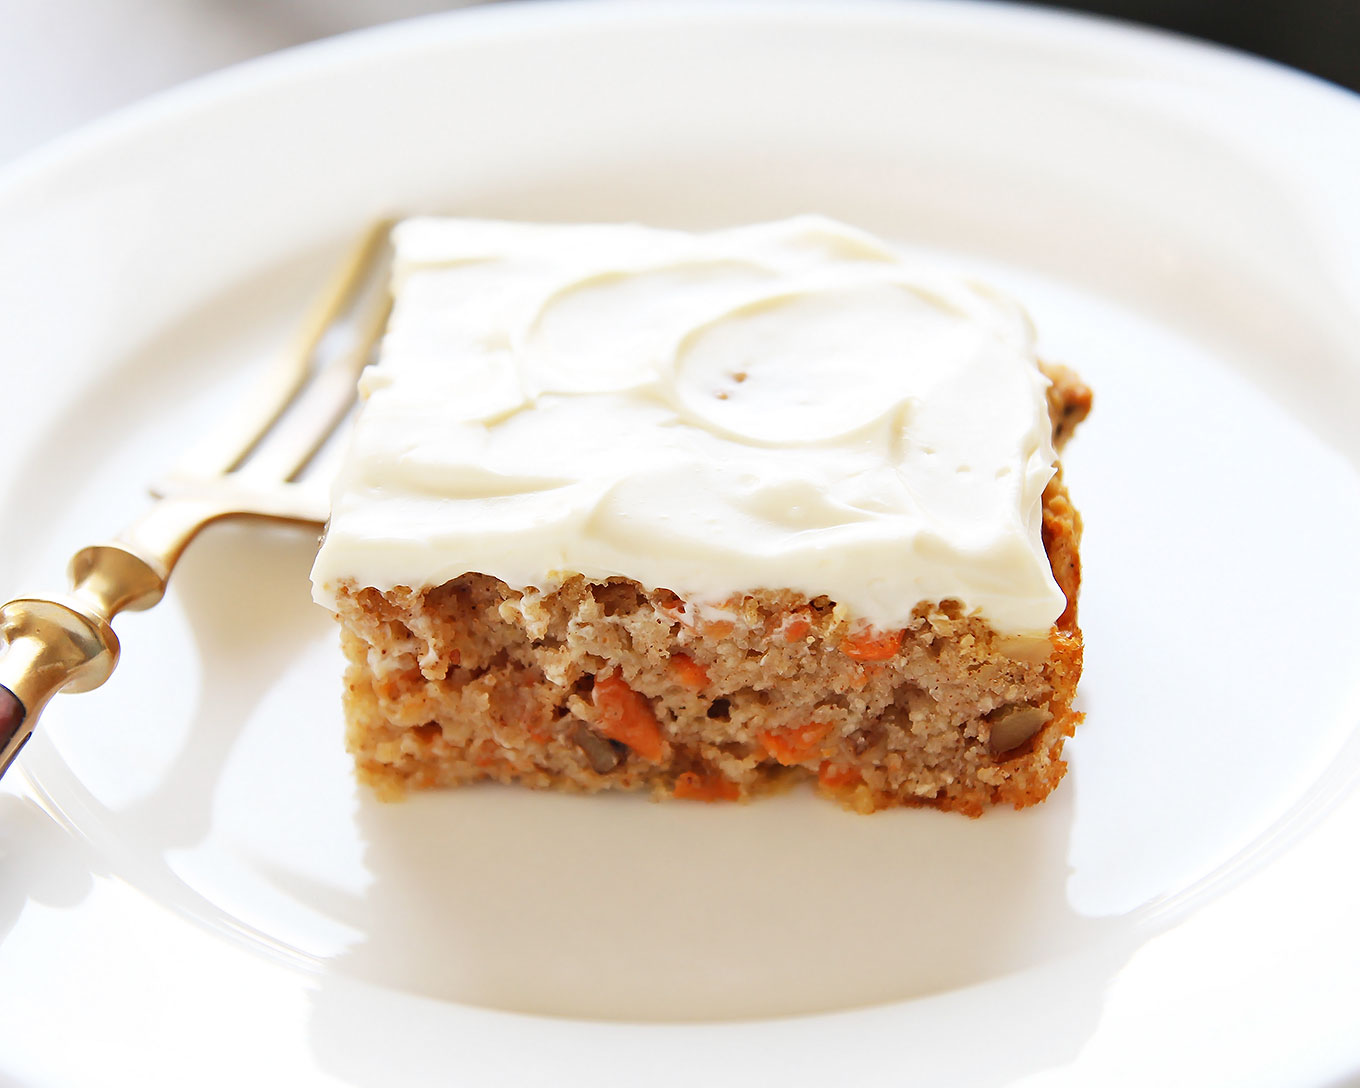 Frosted Healthy Carrot Cake Slice